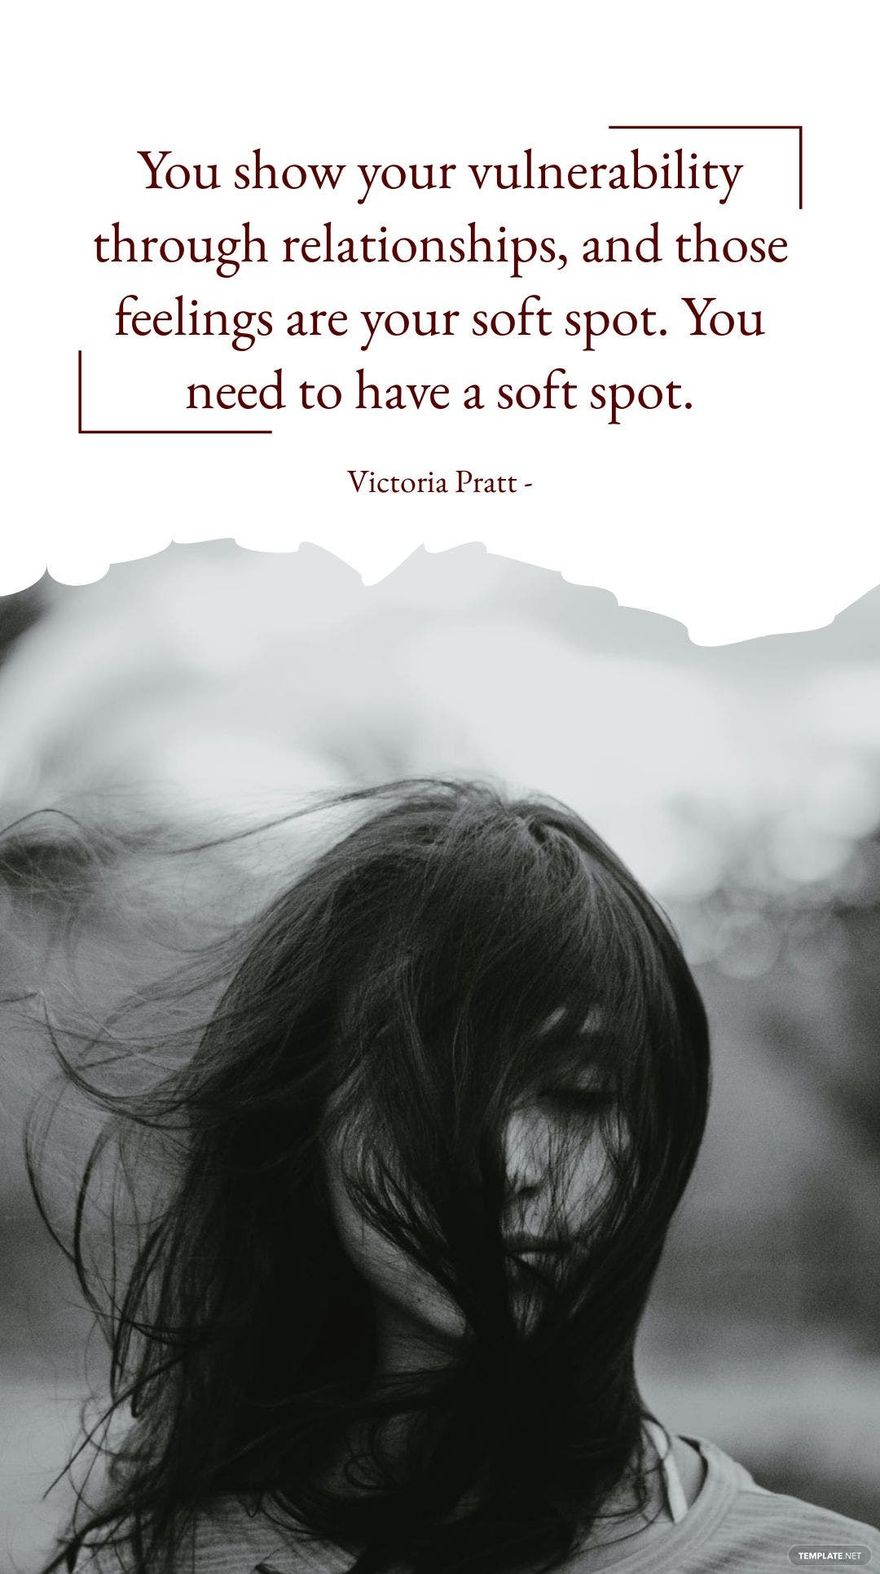 Victoria Pratt - You show your vulnerability through relationships, and those feelings are your soft spot. You need to have a soft spot.